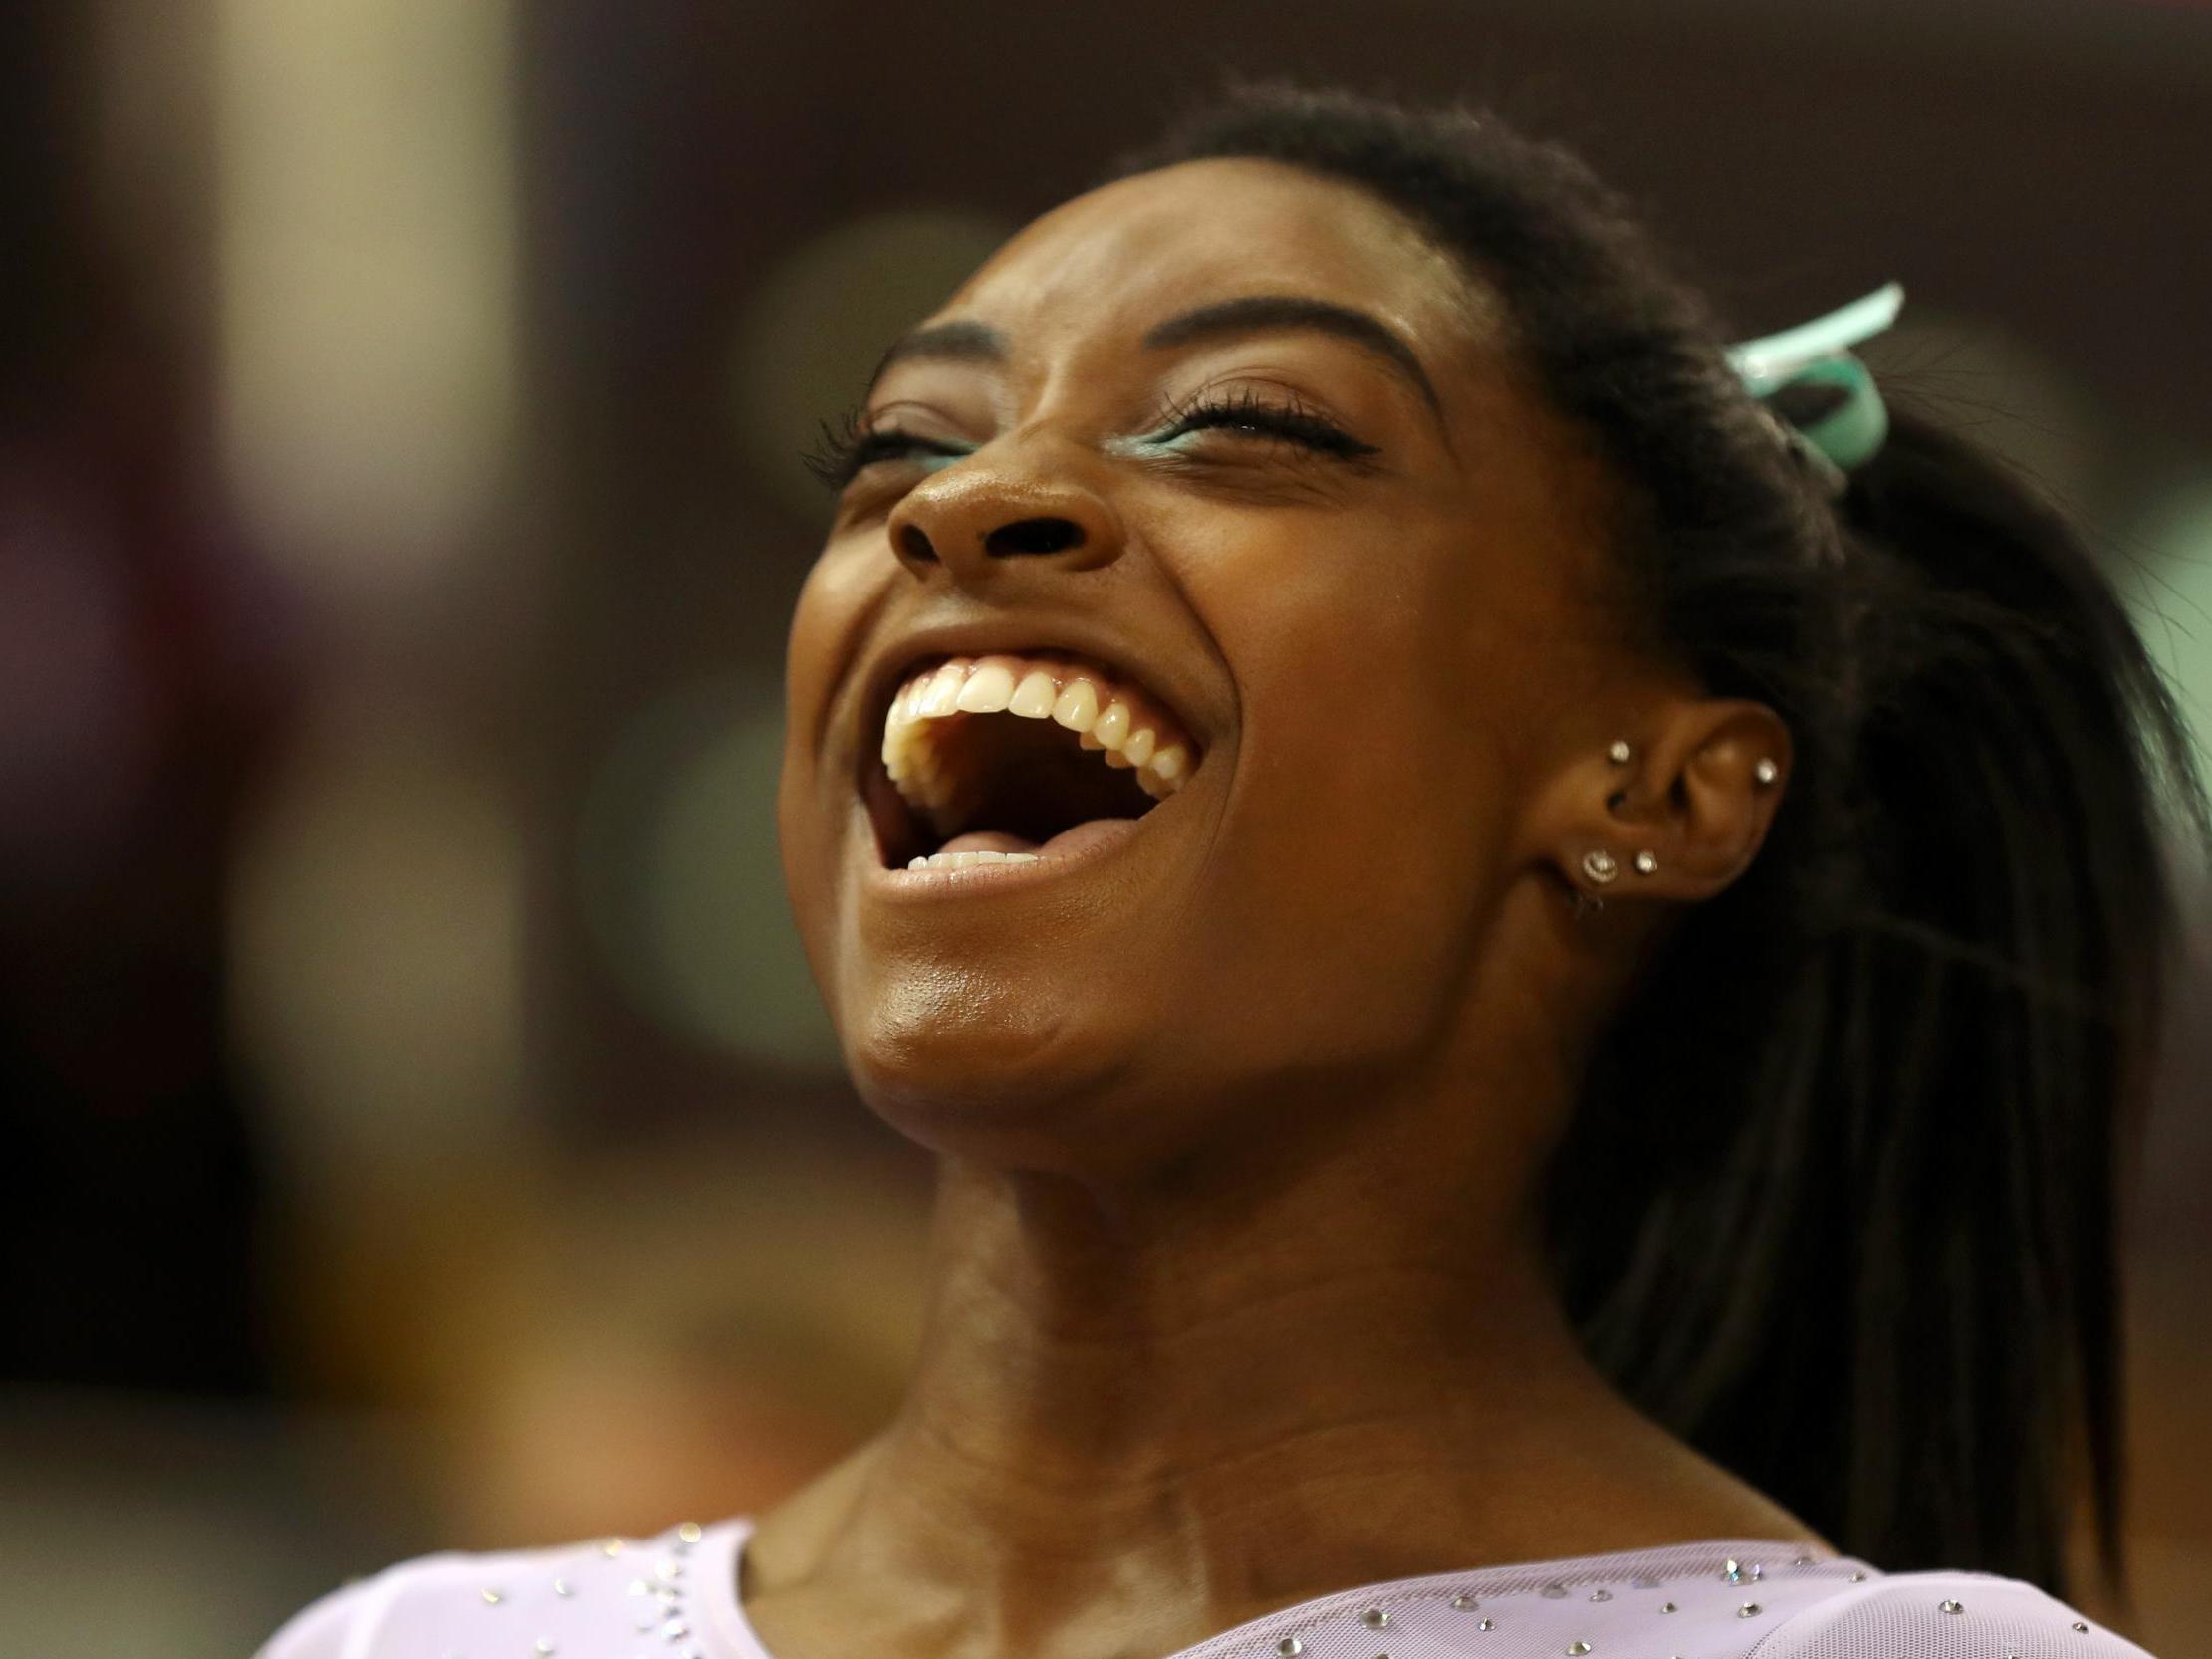 Simone Biles is comfortably cementing her legacy as the greatest gymnast who has ever walked the Earth